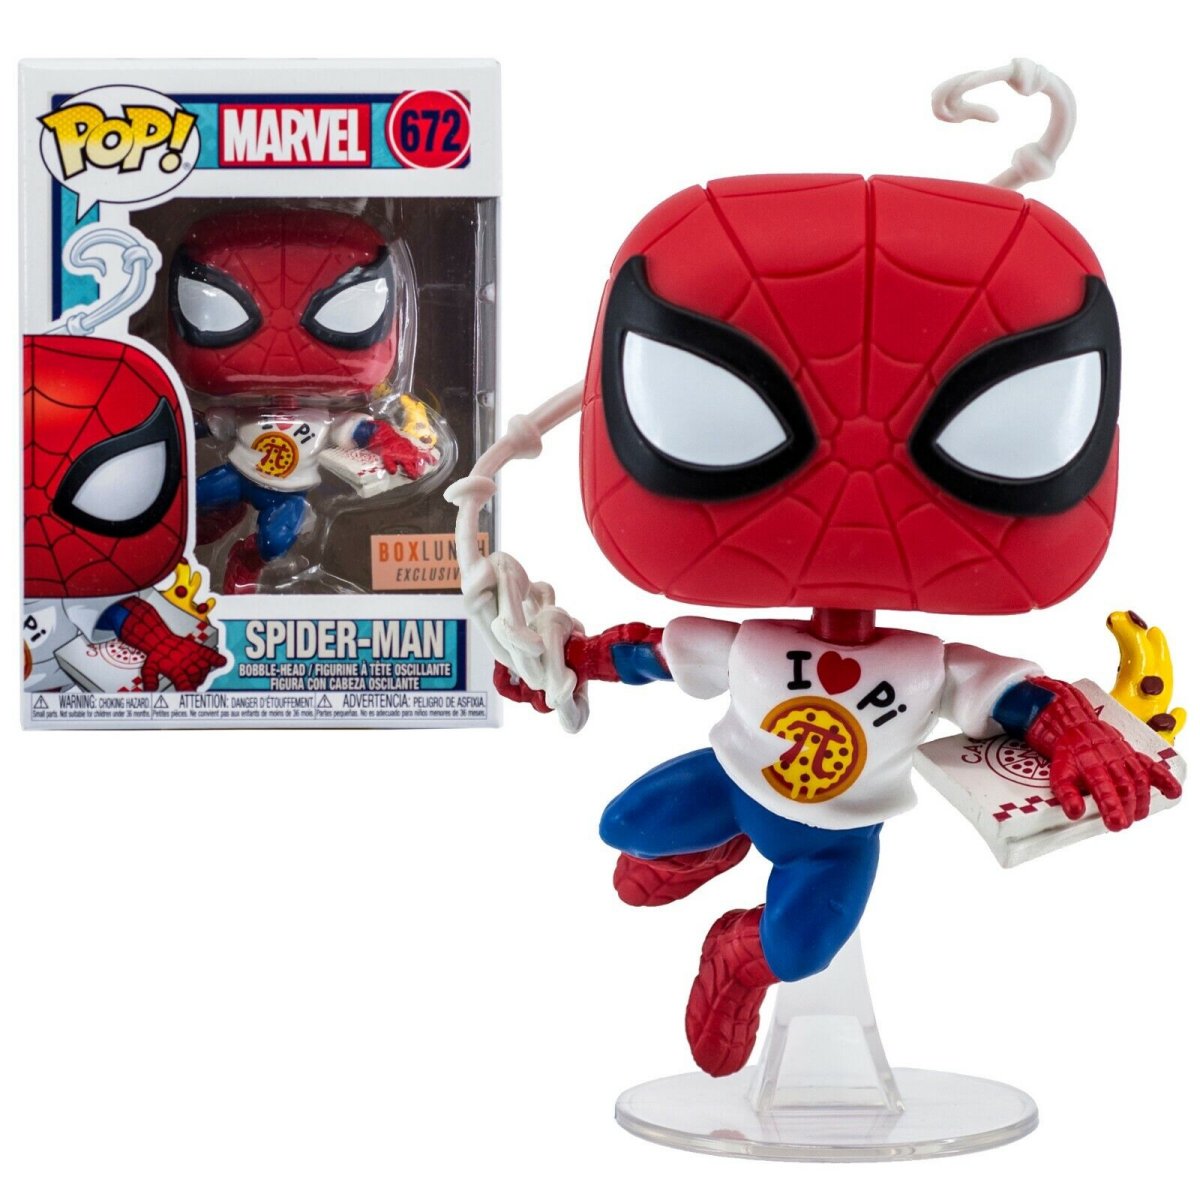 Spider-Man with Pizza Funko Pop, displayed in and out of box (Funko)